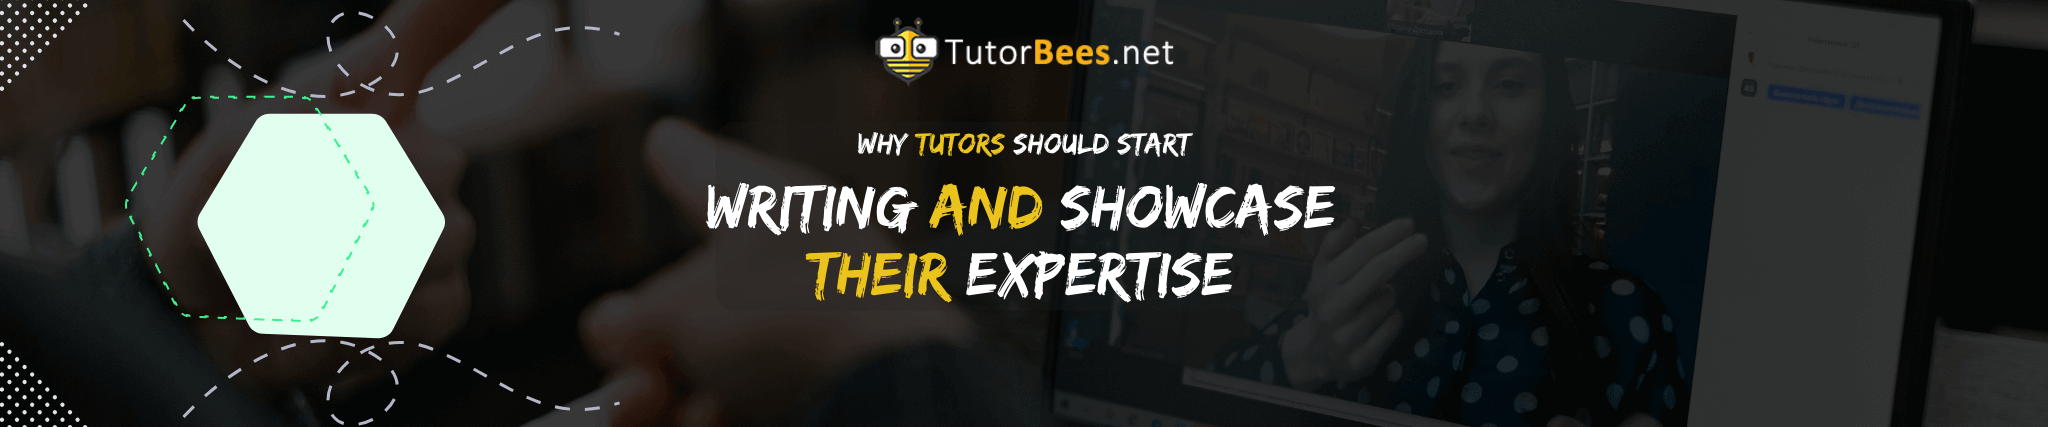 Why Tutors Should Start Writing and Showcase Their Expertise on Tutorbees.net